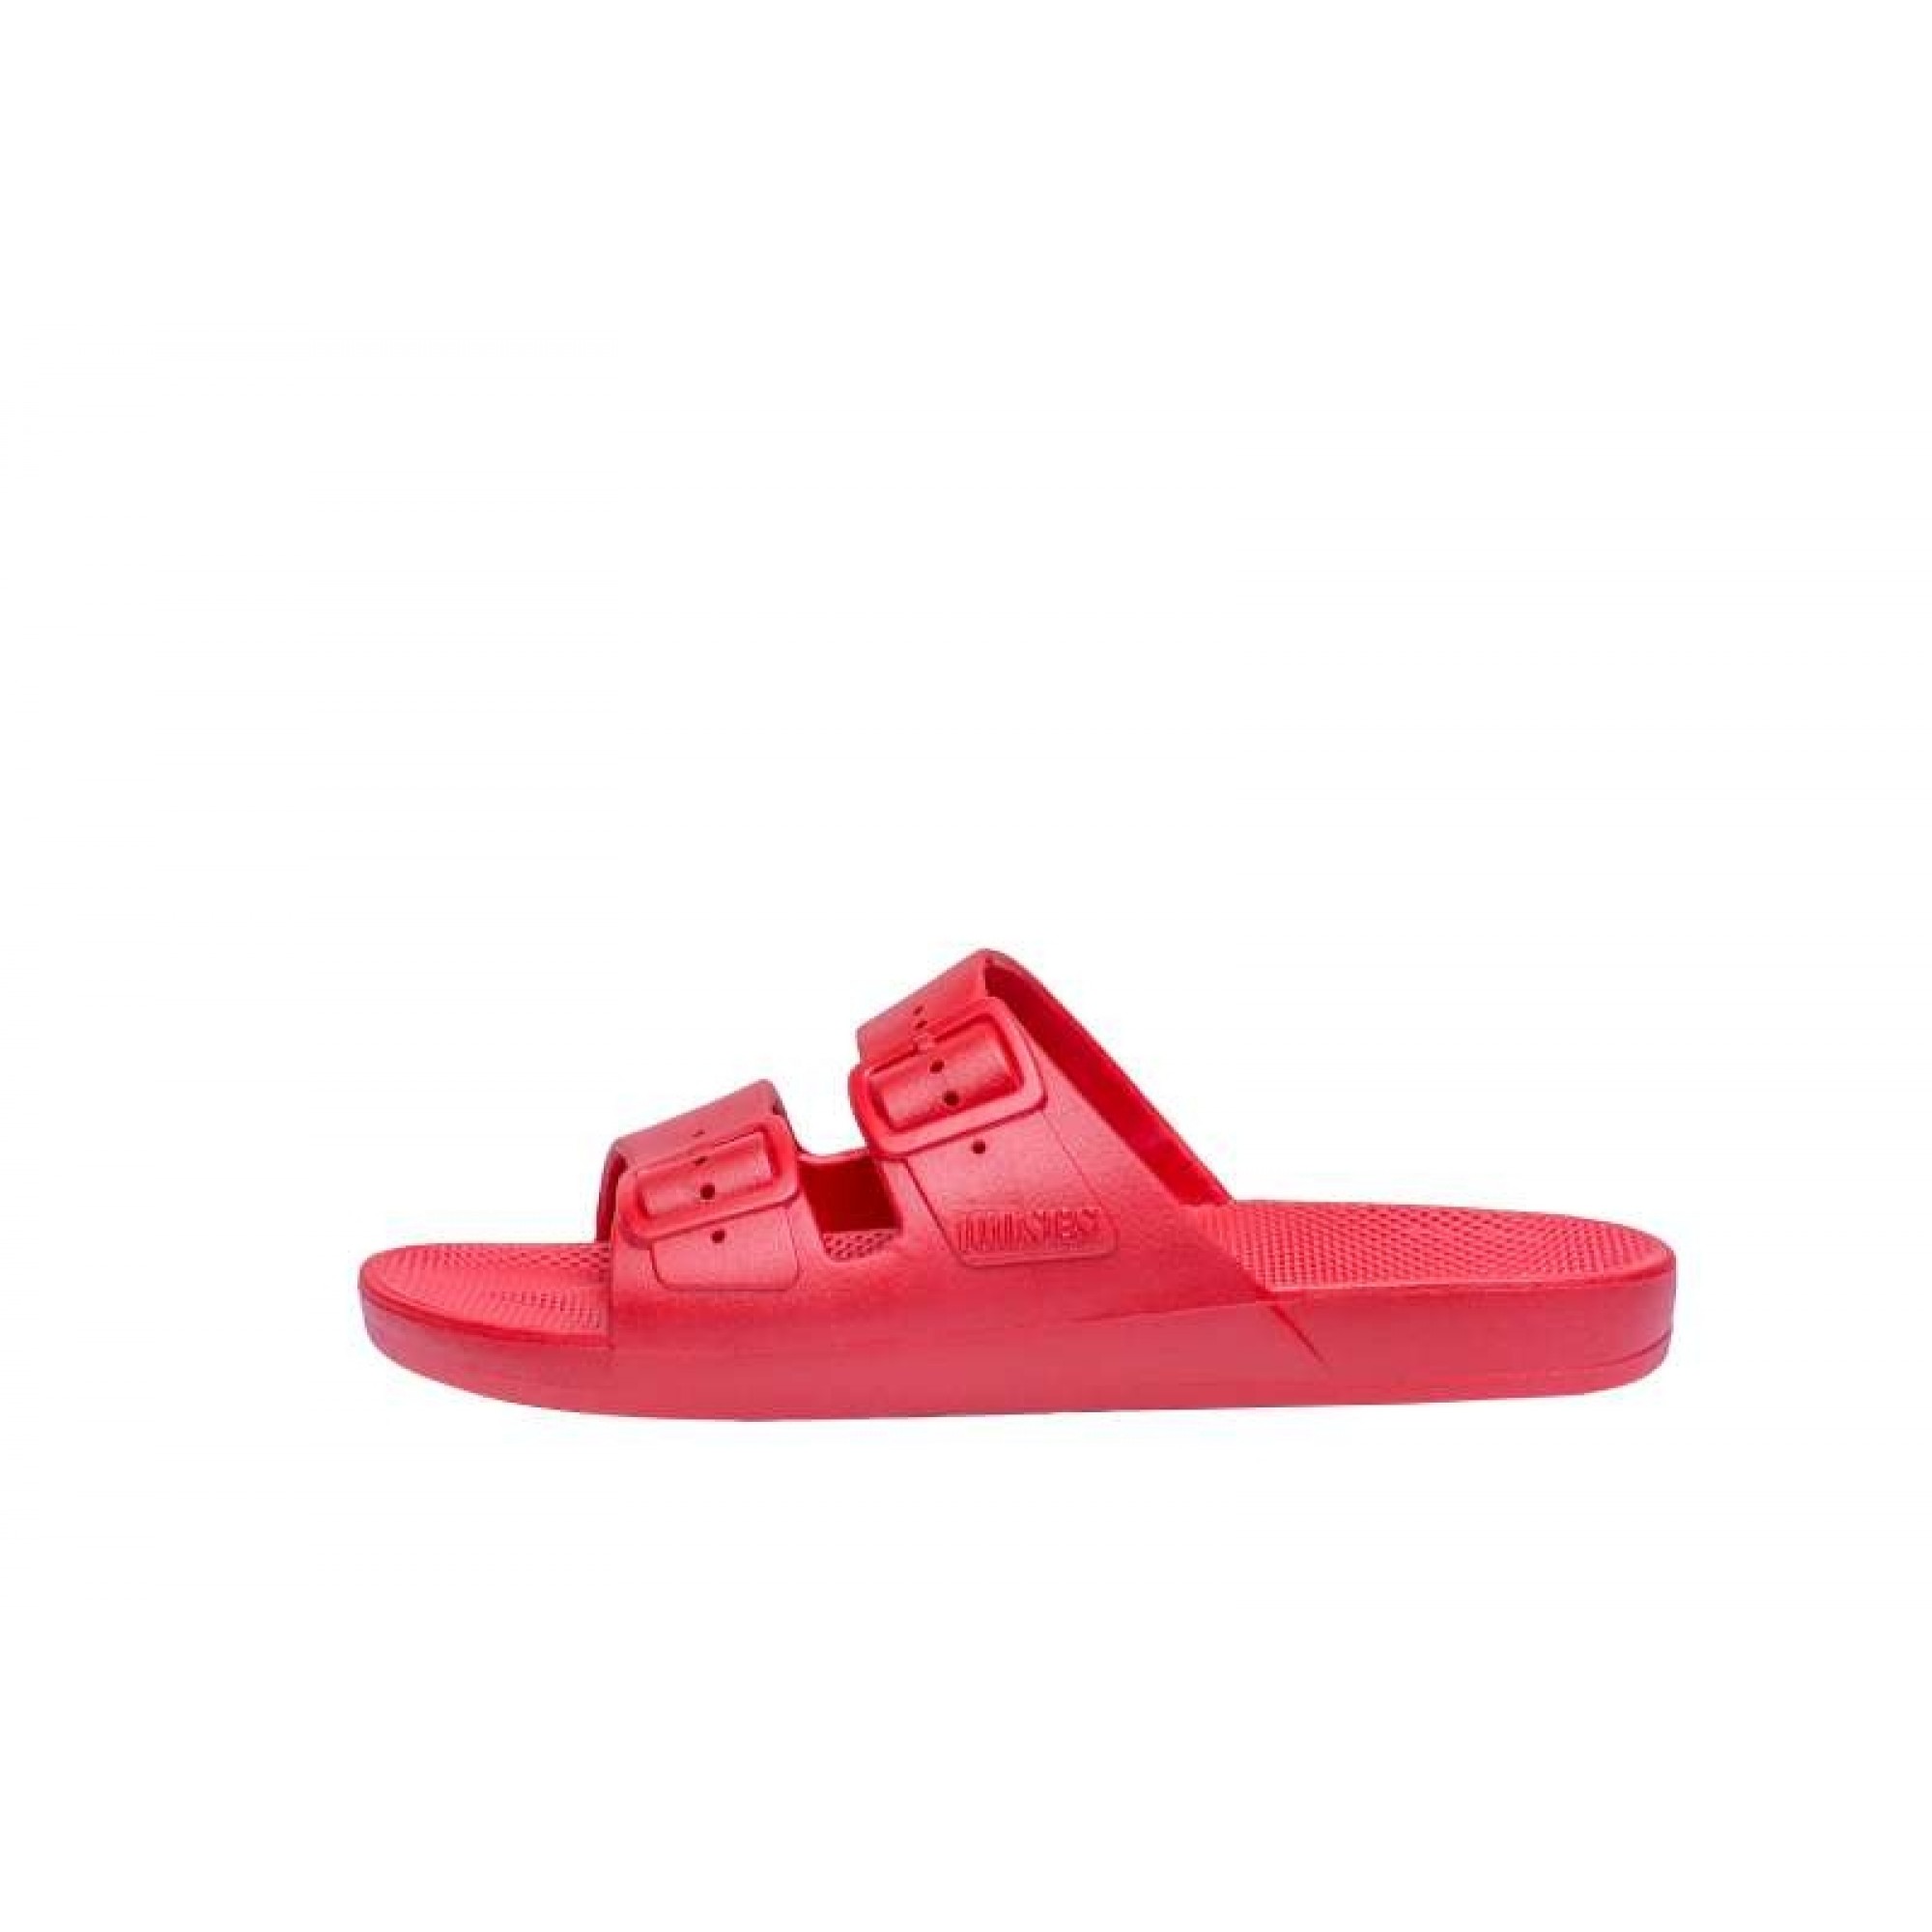 Freedom Moses Adult Sandals Red - Leo & Bella